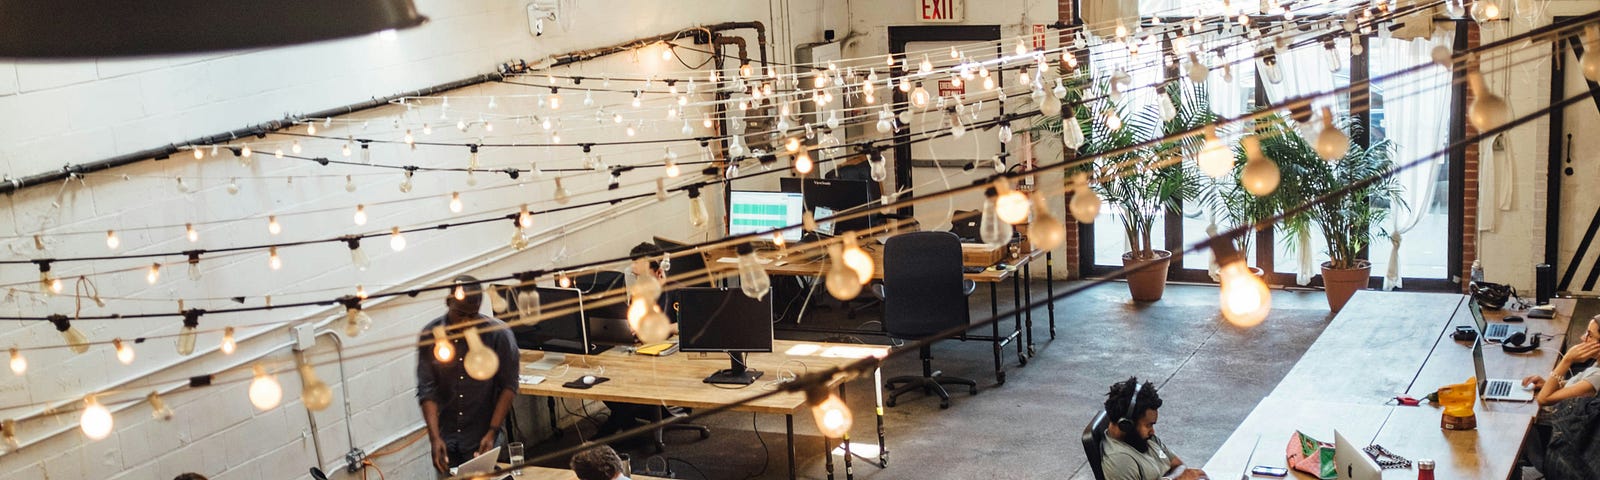 Plunging view of people sitting in front of computer monitors at a coworking space, with light garlands crossing the ceiling.